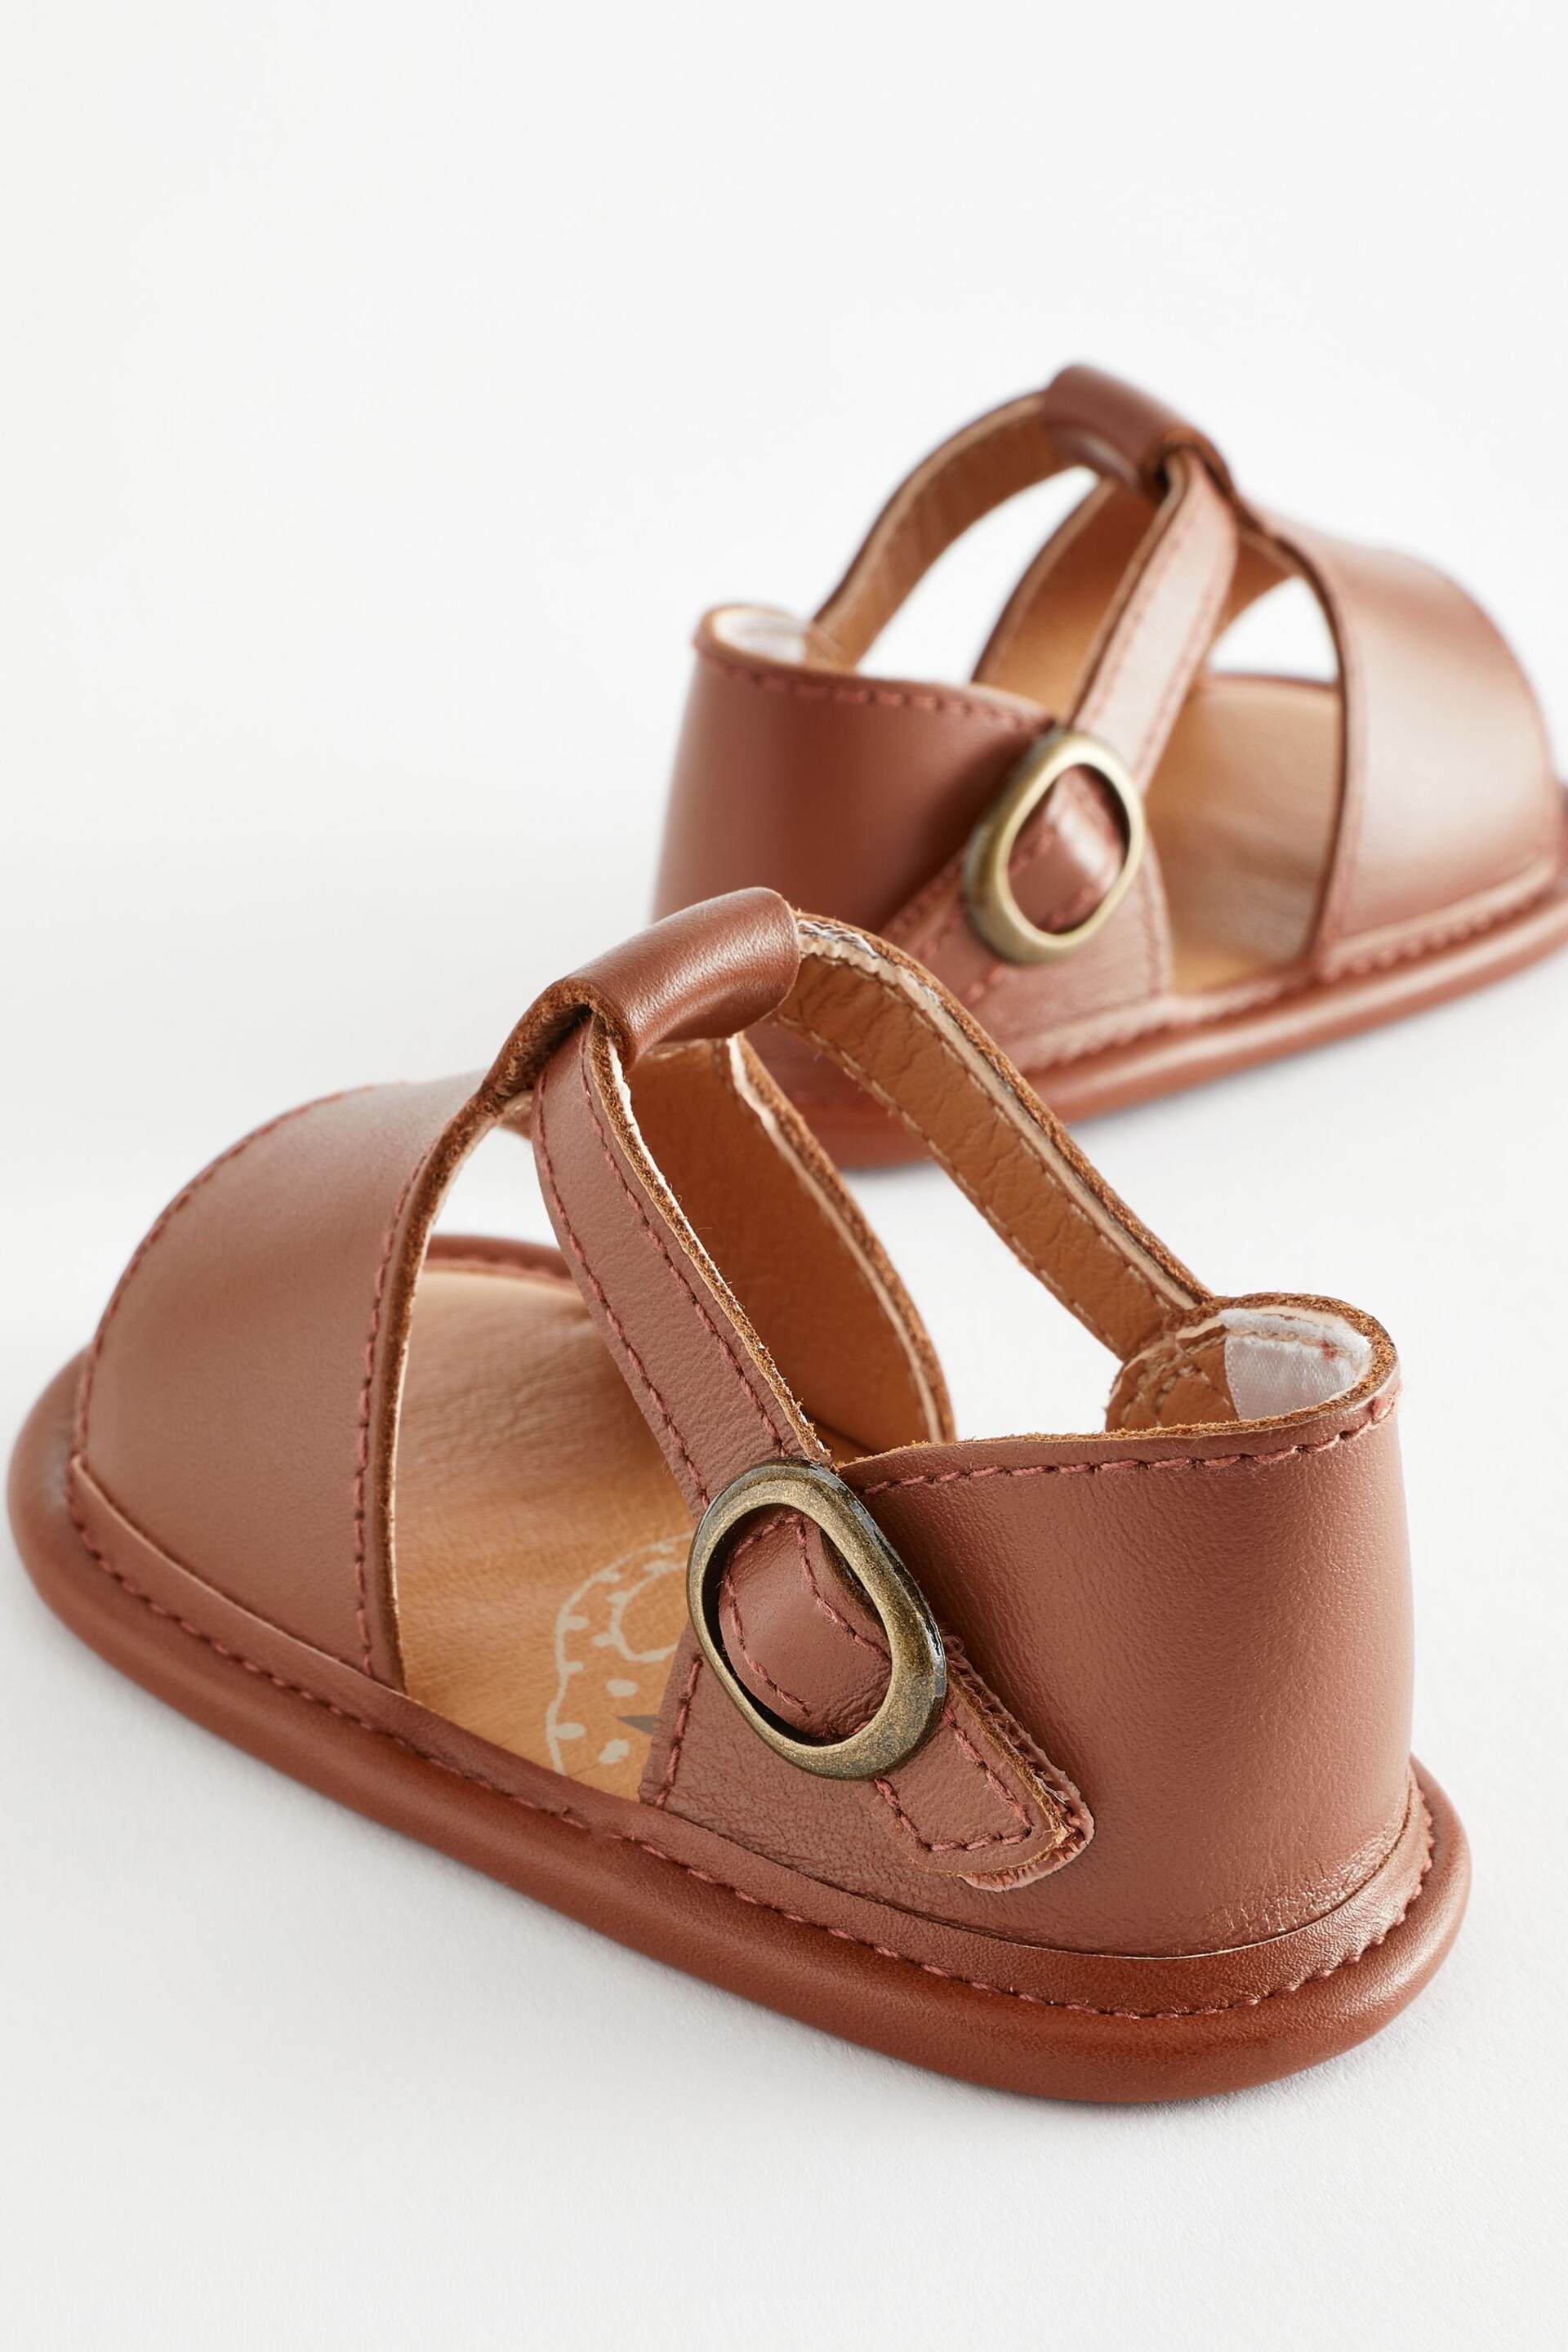 Tan Brown Leather Baby Sandals (0-24mths) - Image 5 of 6